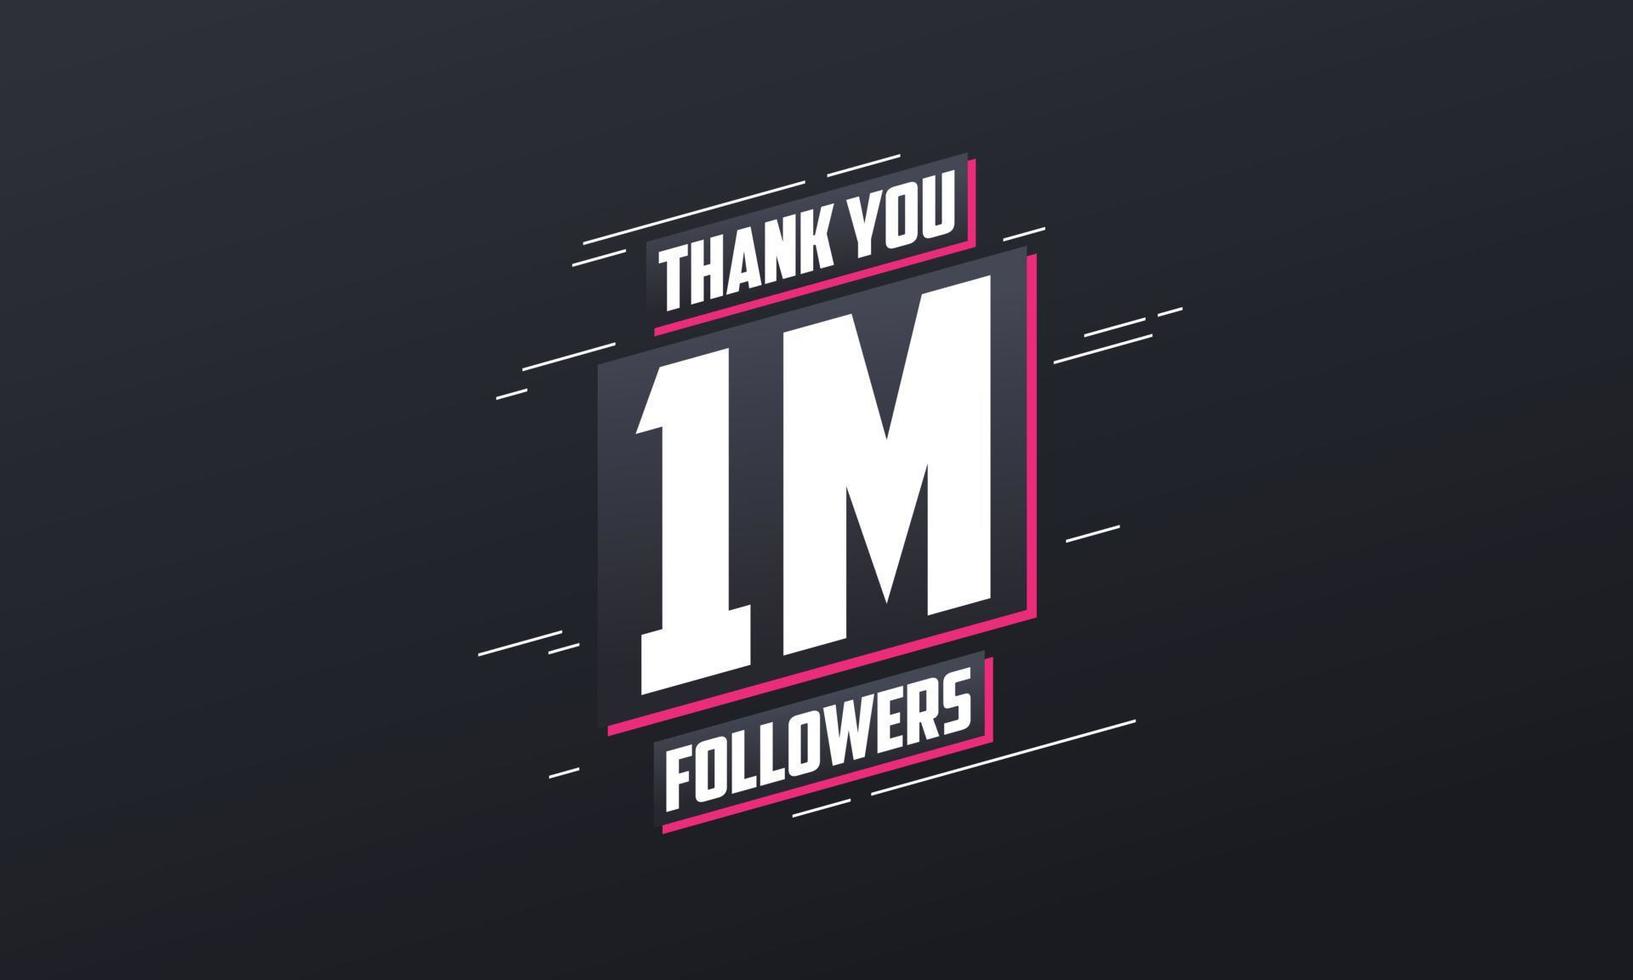 Thank you 1M followers, Greeting card template for social networks. vector